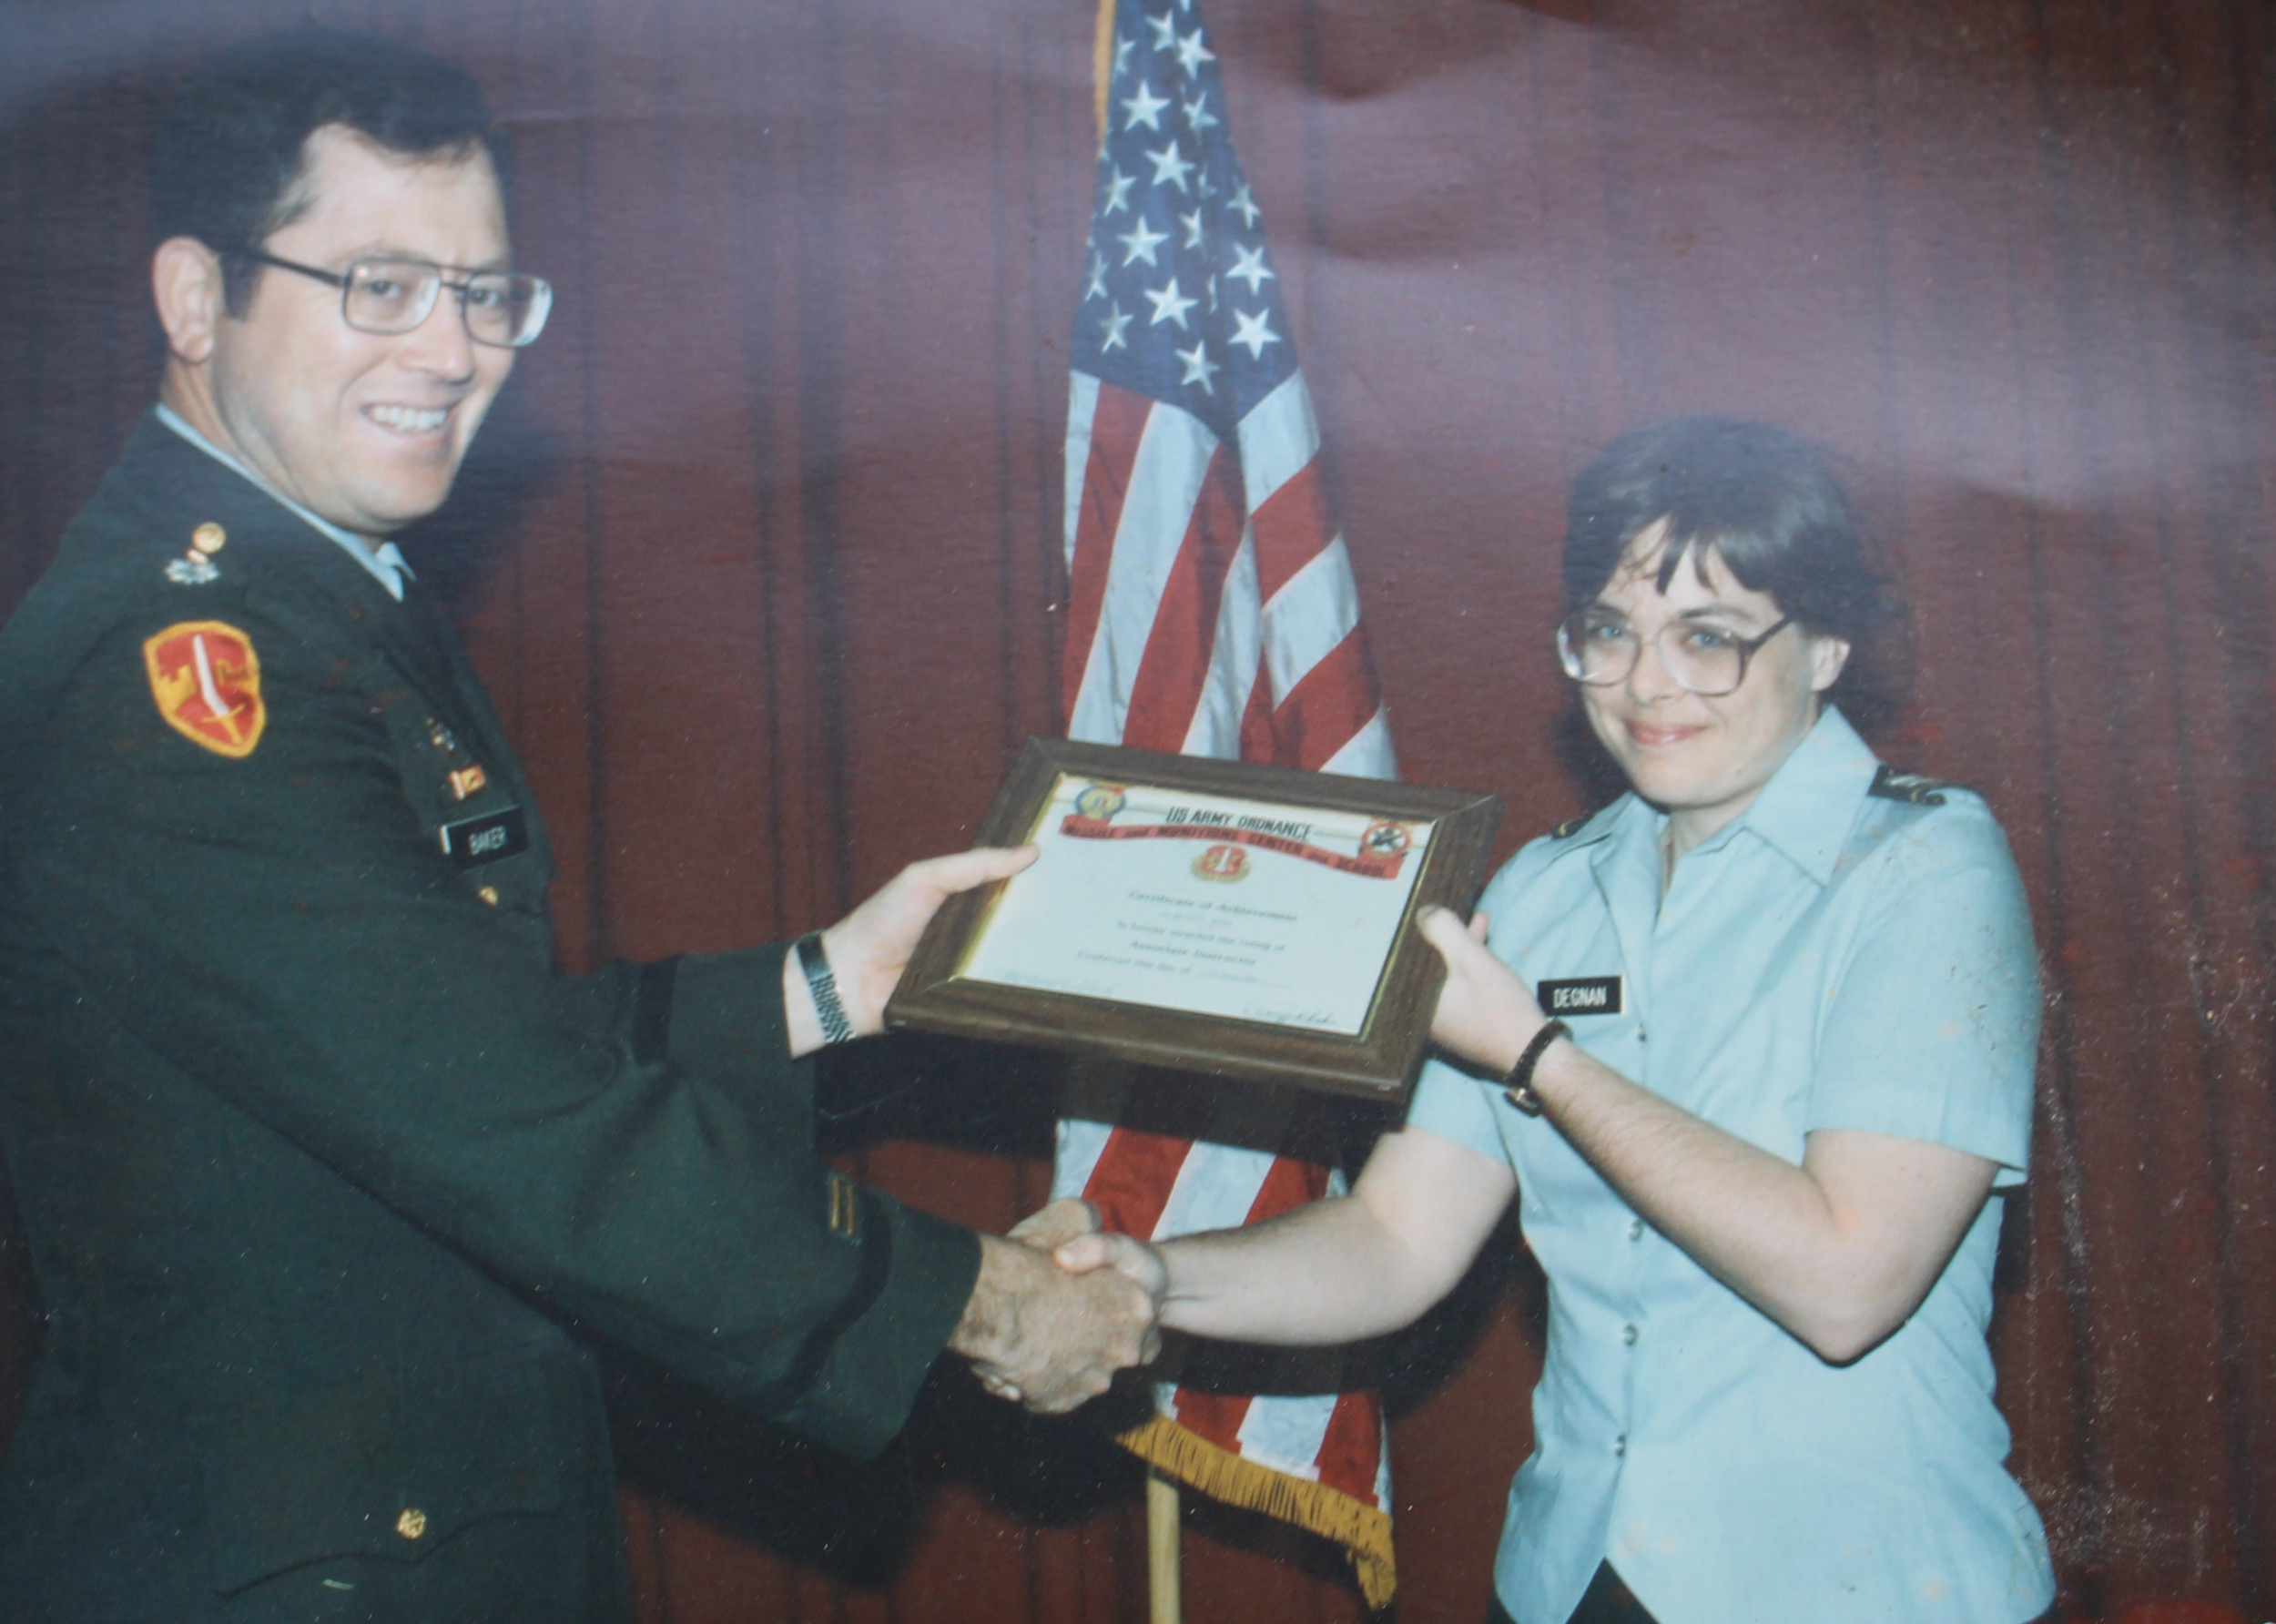 A woman shakes hands and accepts a framed certificate from a man dressed in Army uniform.